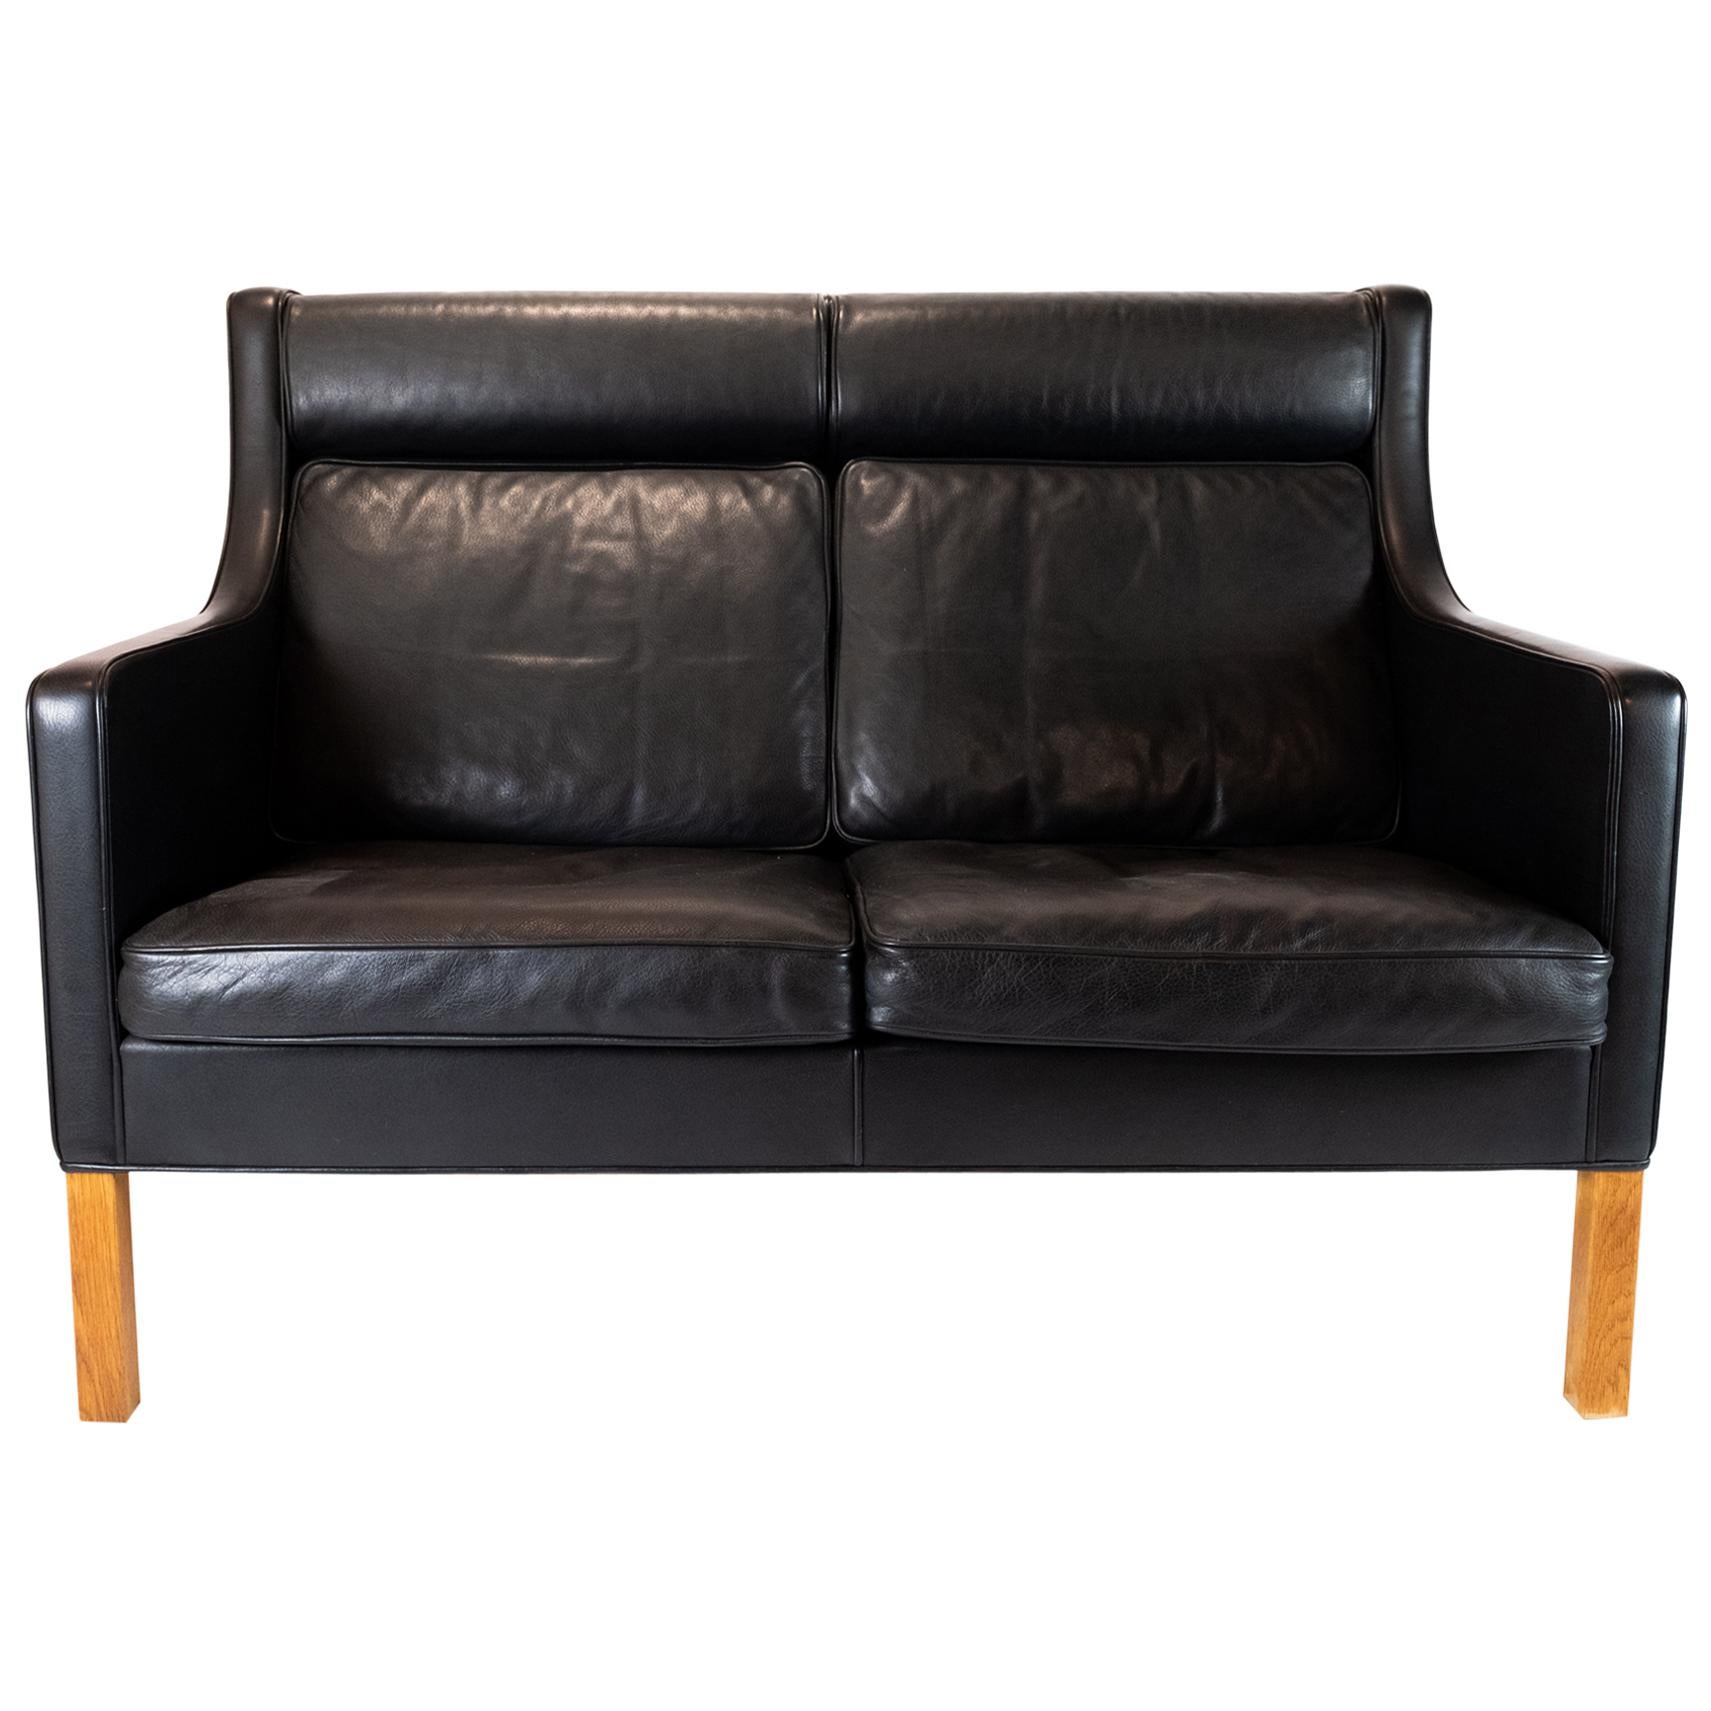 Kupe 2-Seat Sofa Model 2192 Made In Black Leather By Børge Mogensen From 1970s